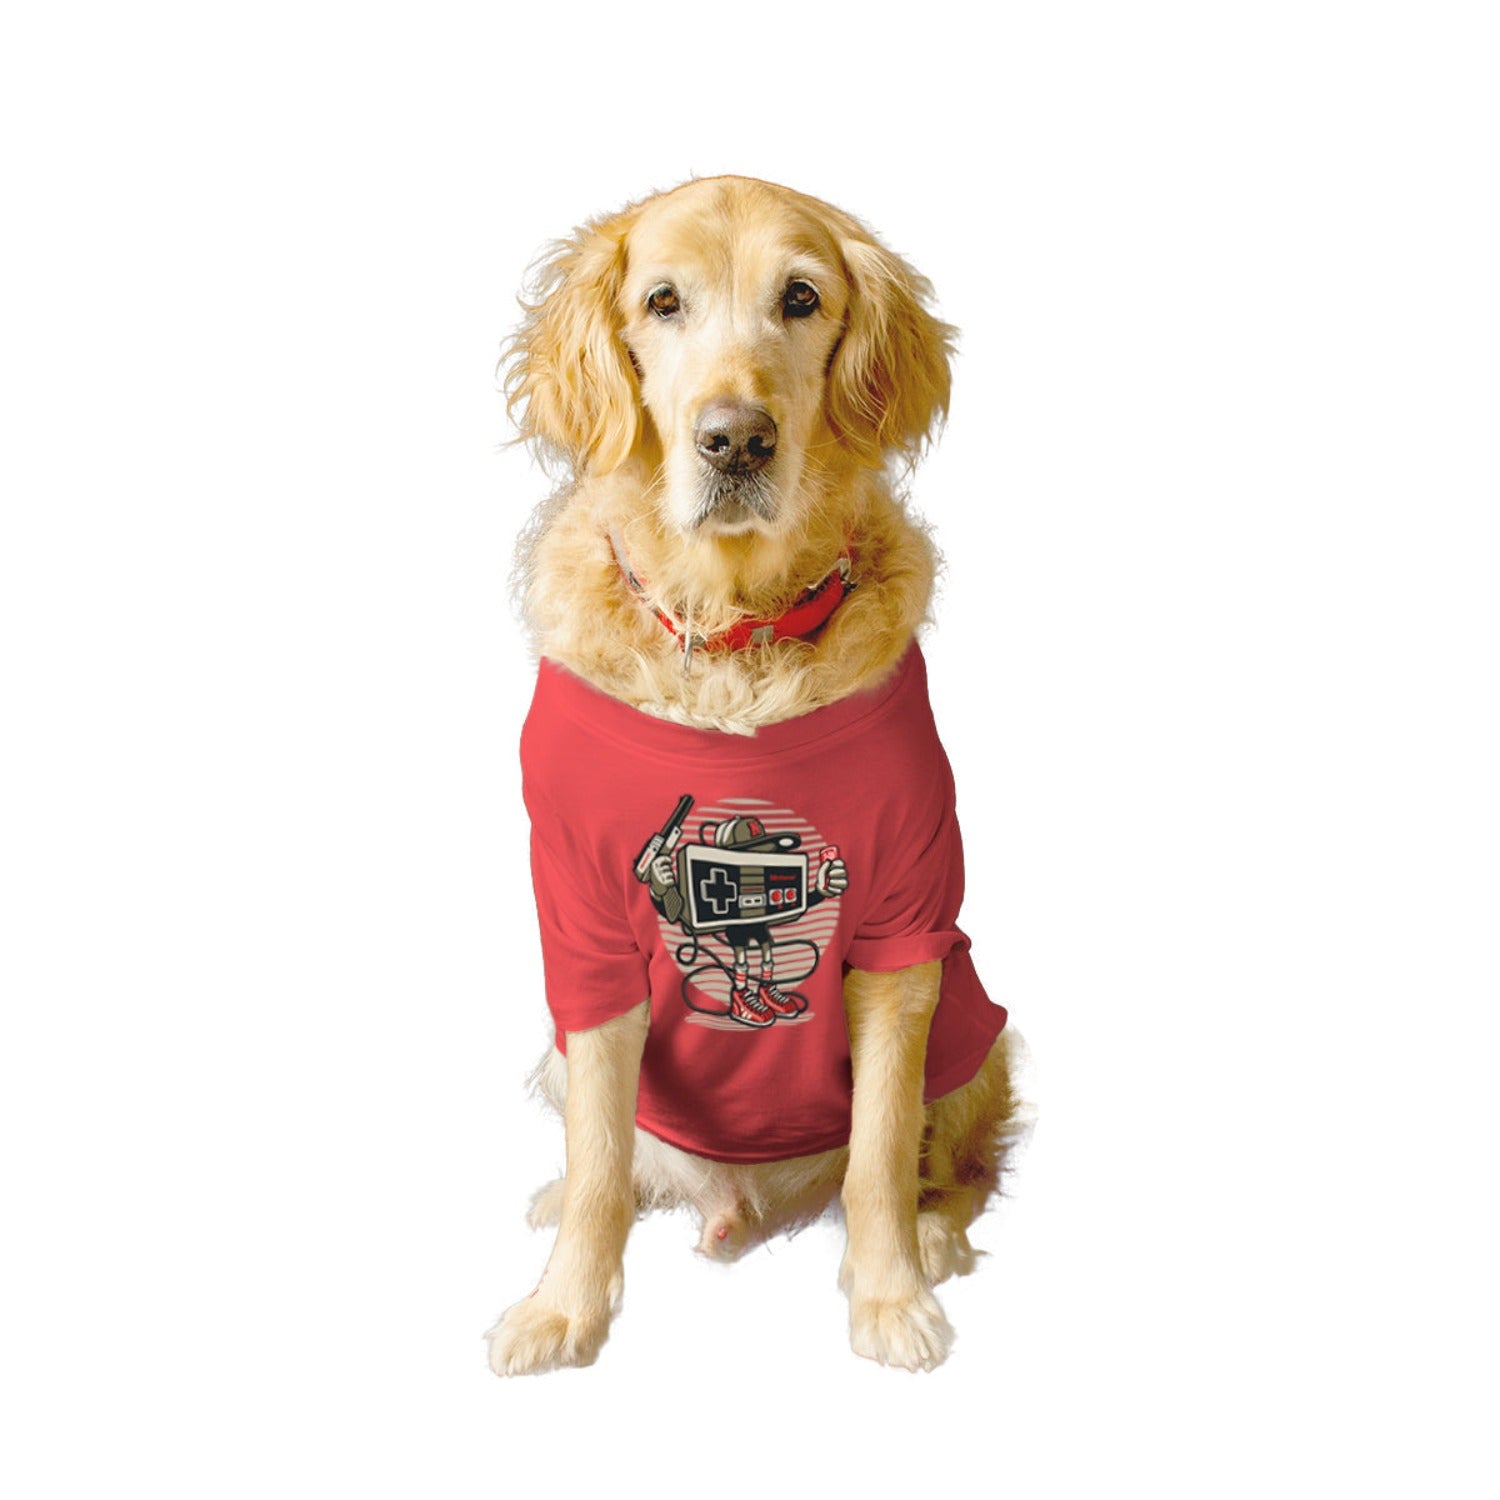 Ruse XX-Small (Chihuahuas, Papillons) / Poppy Red Ruse Basic Crew Neck "Let's Play" Printed Half Sleeves Dog Tee